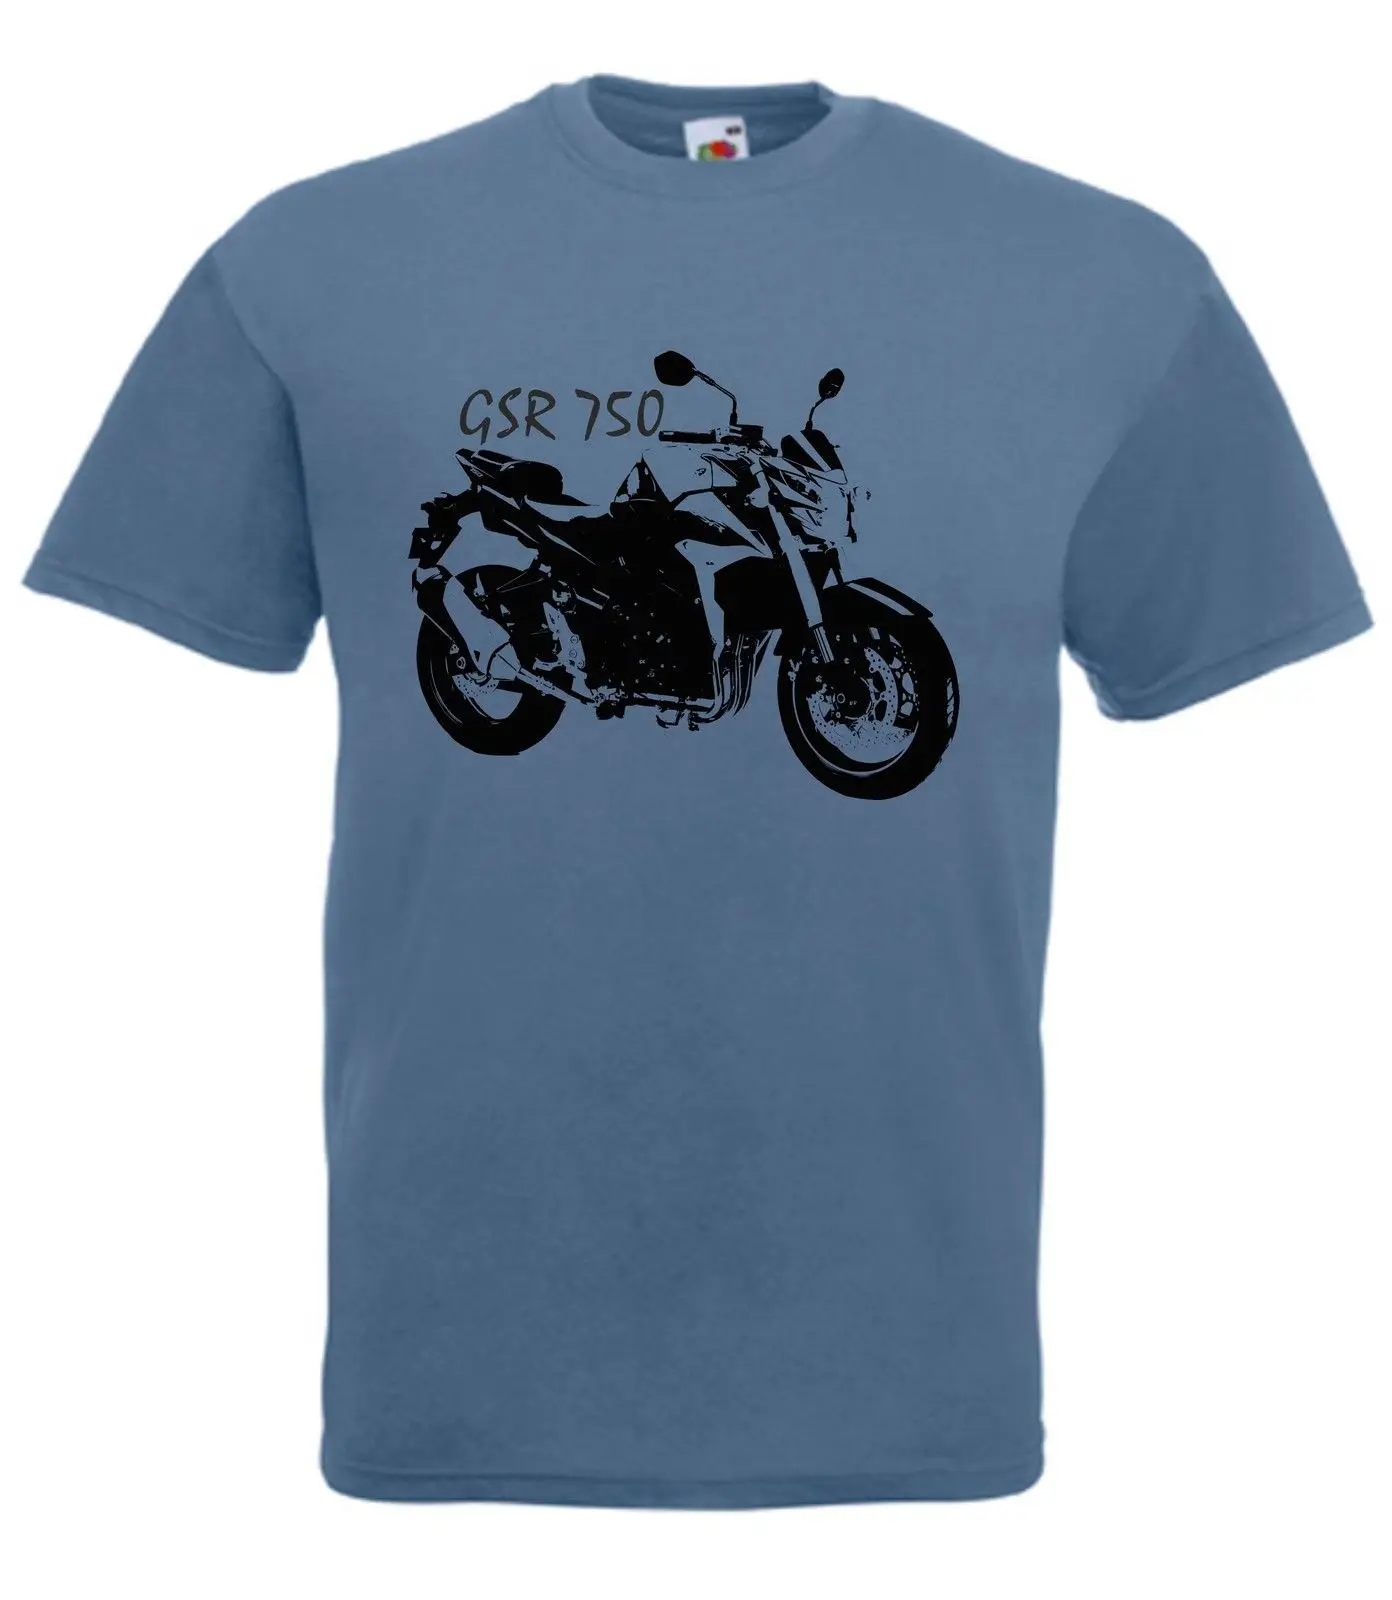 2019 Hot Summer Sale Fashion T-Shirt Japanese Motorcycle GSR 750 Retro Style 100%cotton Tee Shirt for Men